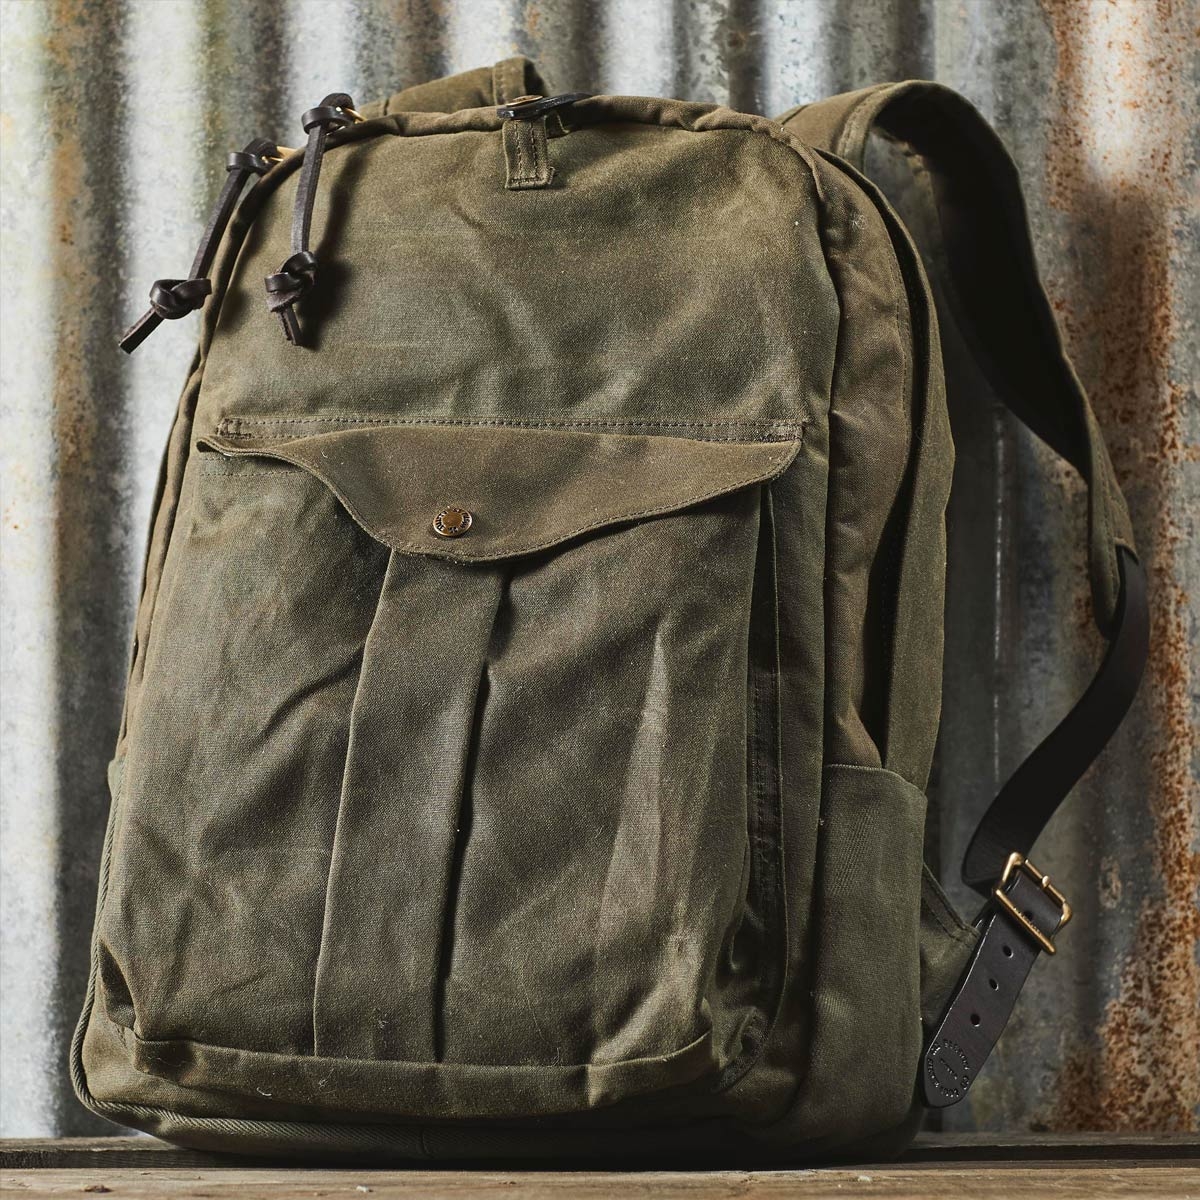 Filson Journeyman Backpack 20231638 Otter Green, great for hiking and for hauling stuff around town